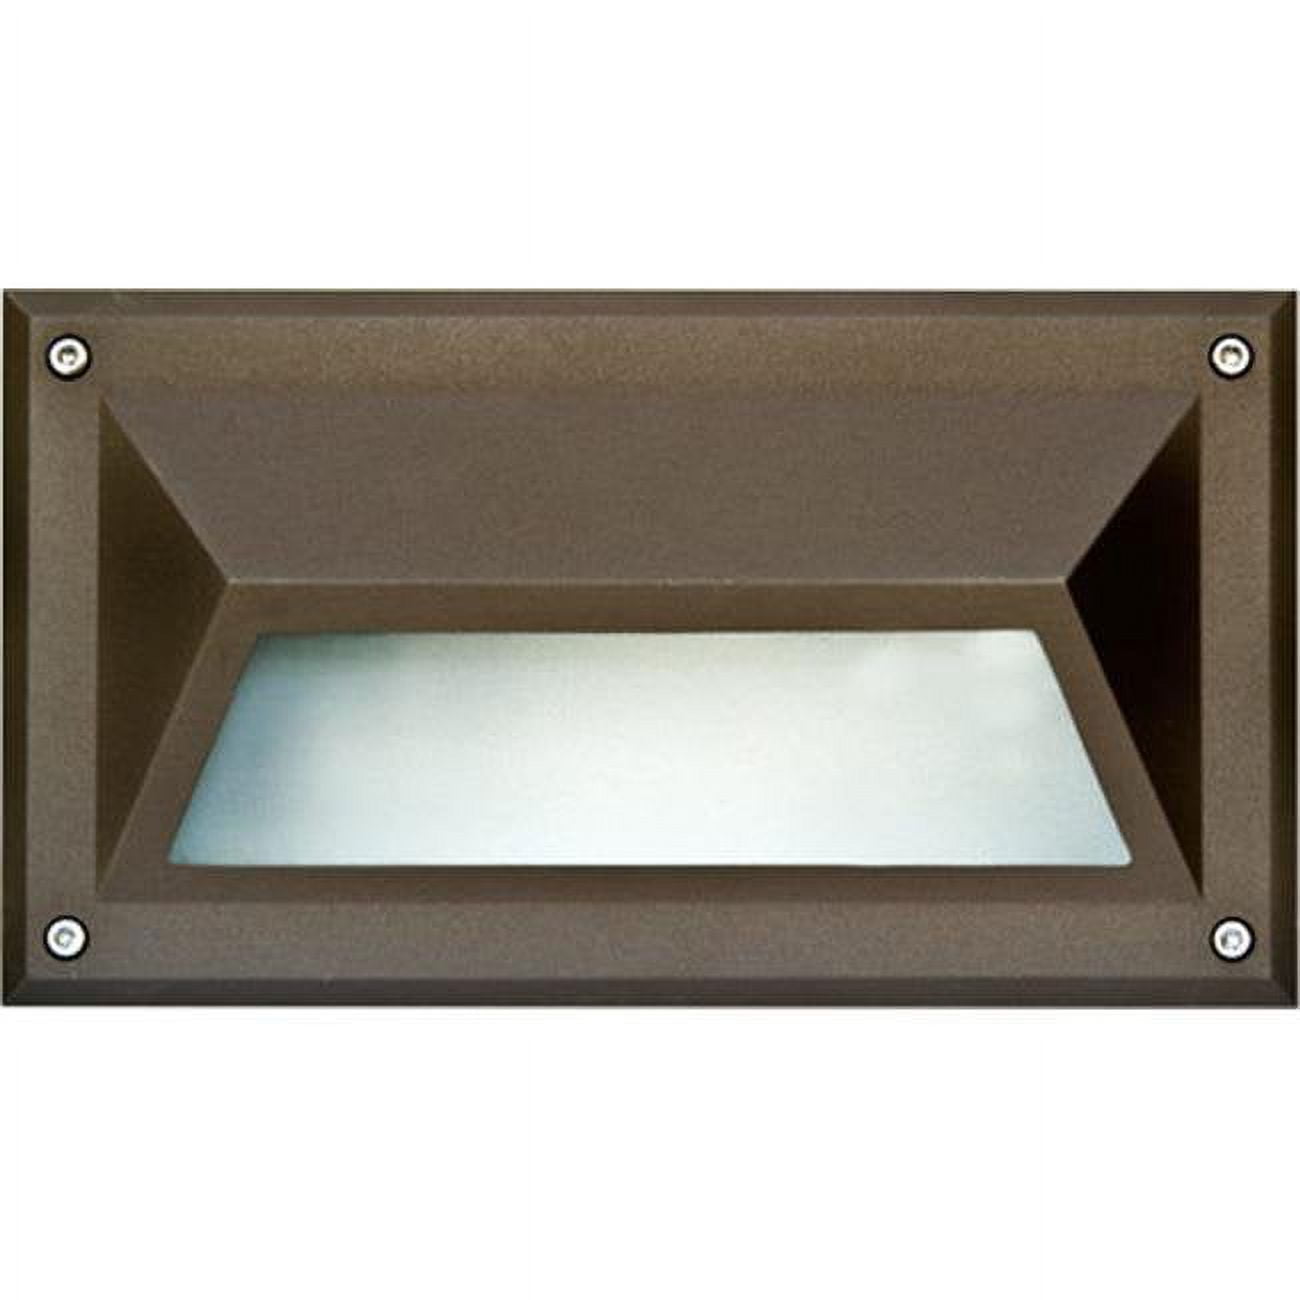 Picture of Dabmar Lighting DSL1002-BZ Recessed Hooded Brick, Step & Wall Light, Bronze - 5 x 8.90 x 3.75 in.